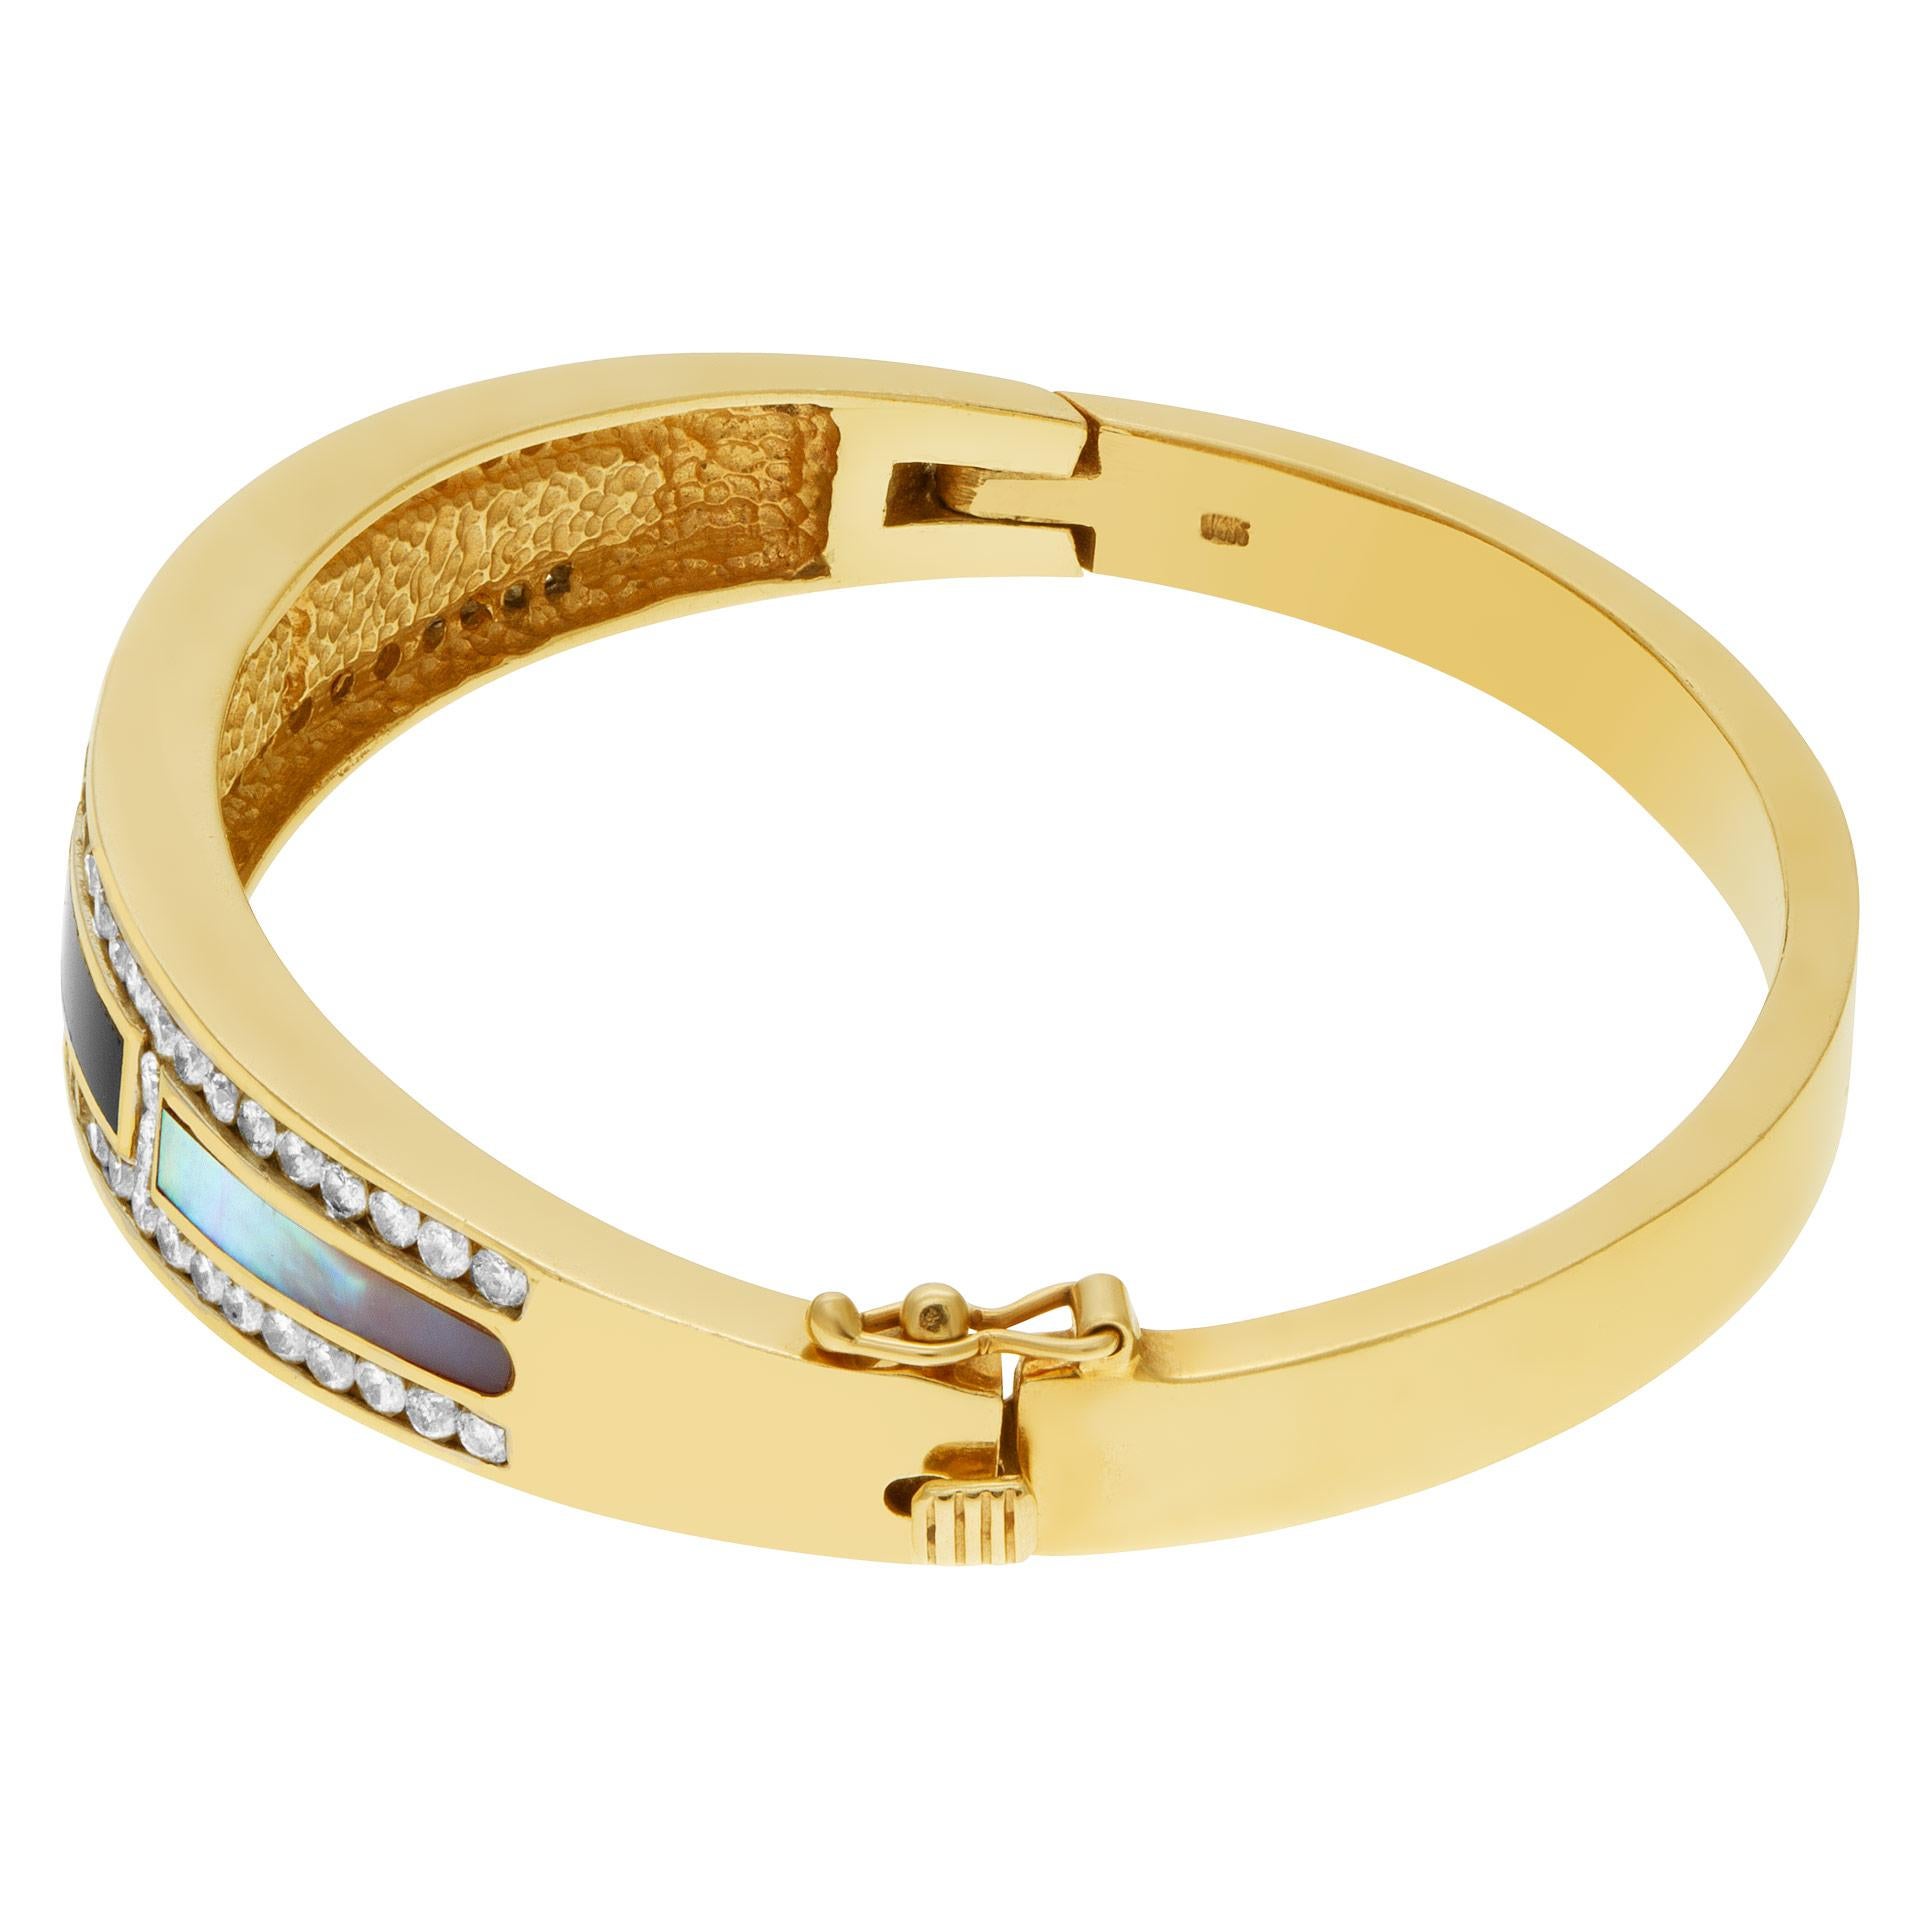 Regal diamond bangle in 14k yellow gold with mother of pearl, black onyx inlay and over 2 carats in diamonds. Bangle measures aproximately 11mm at the front.  Fits up to 7 inch wrist.
